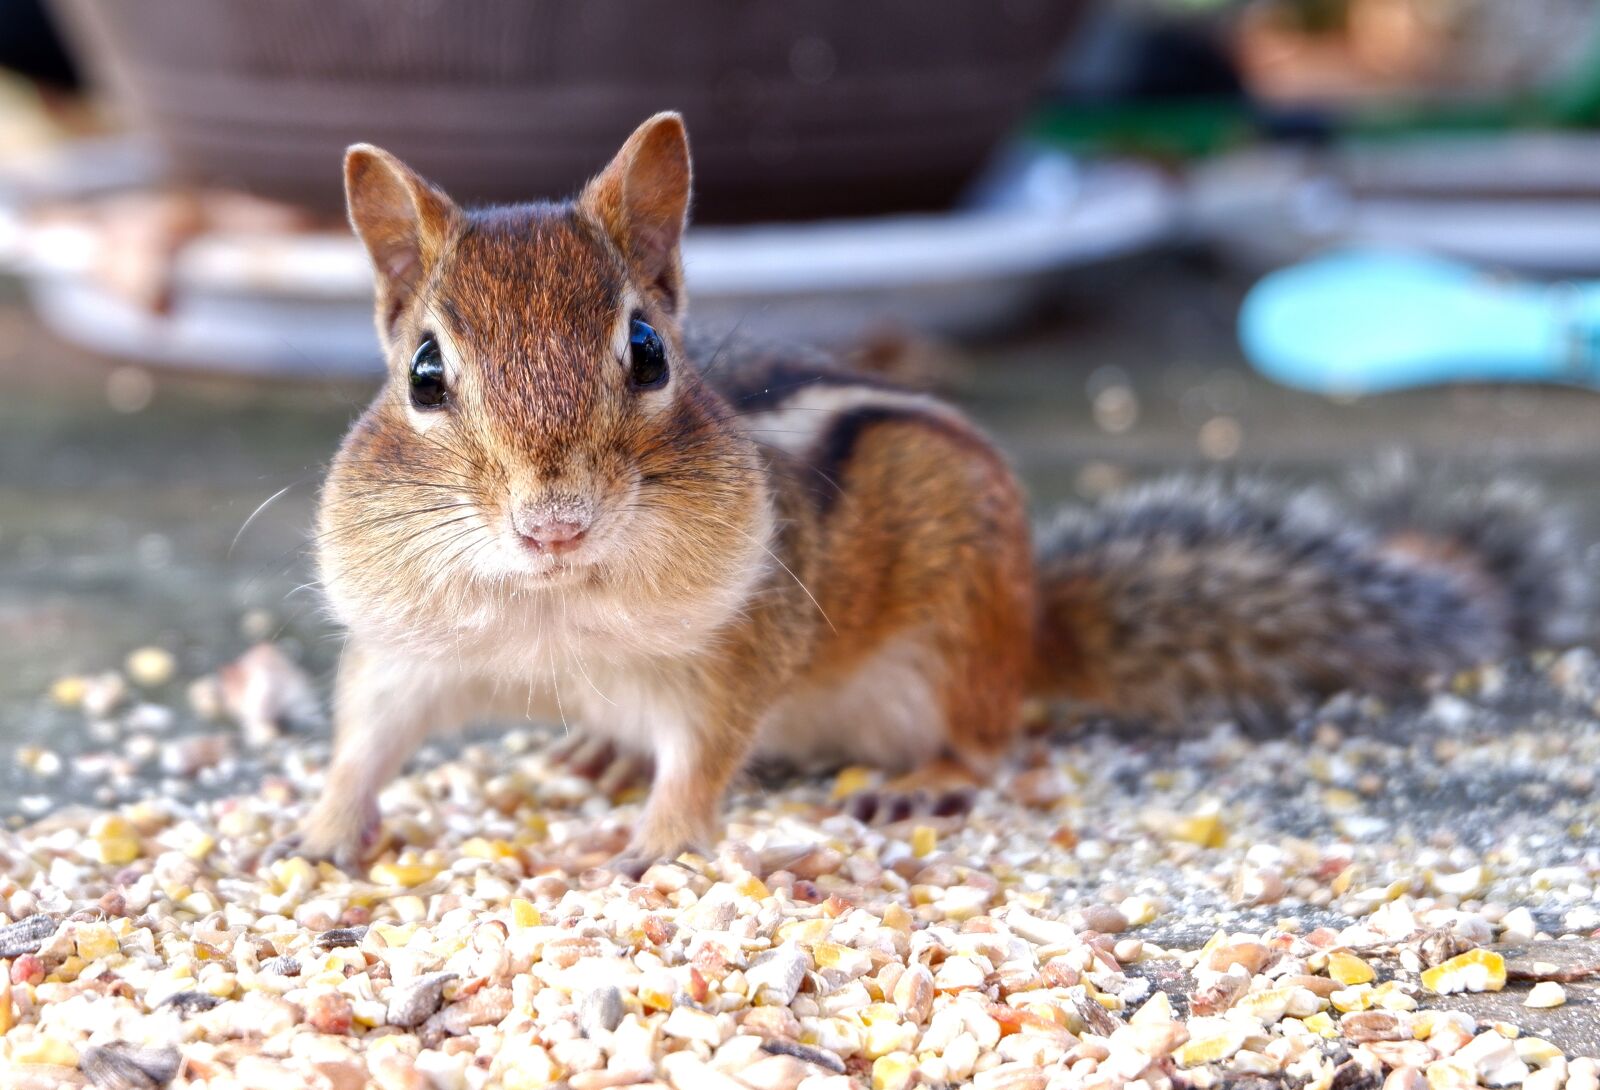 Fujifilm X-A3 sample photo. Chipmunk striped, squirrel, rodent photography